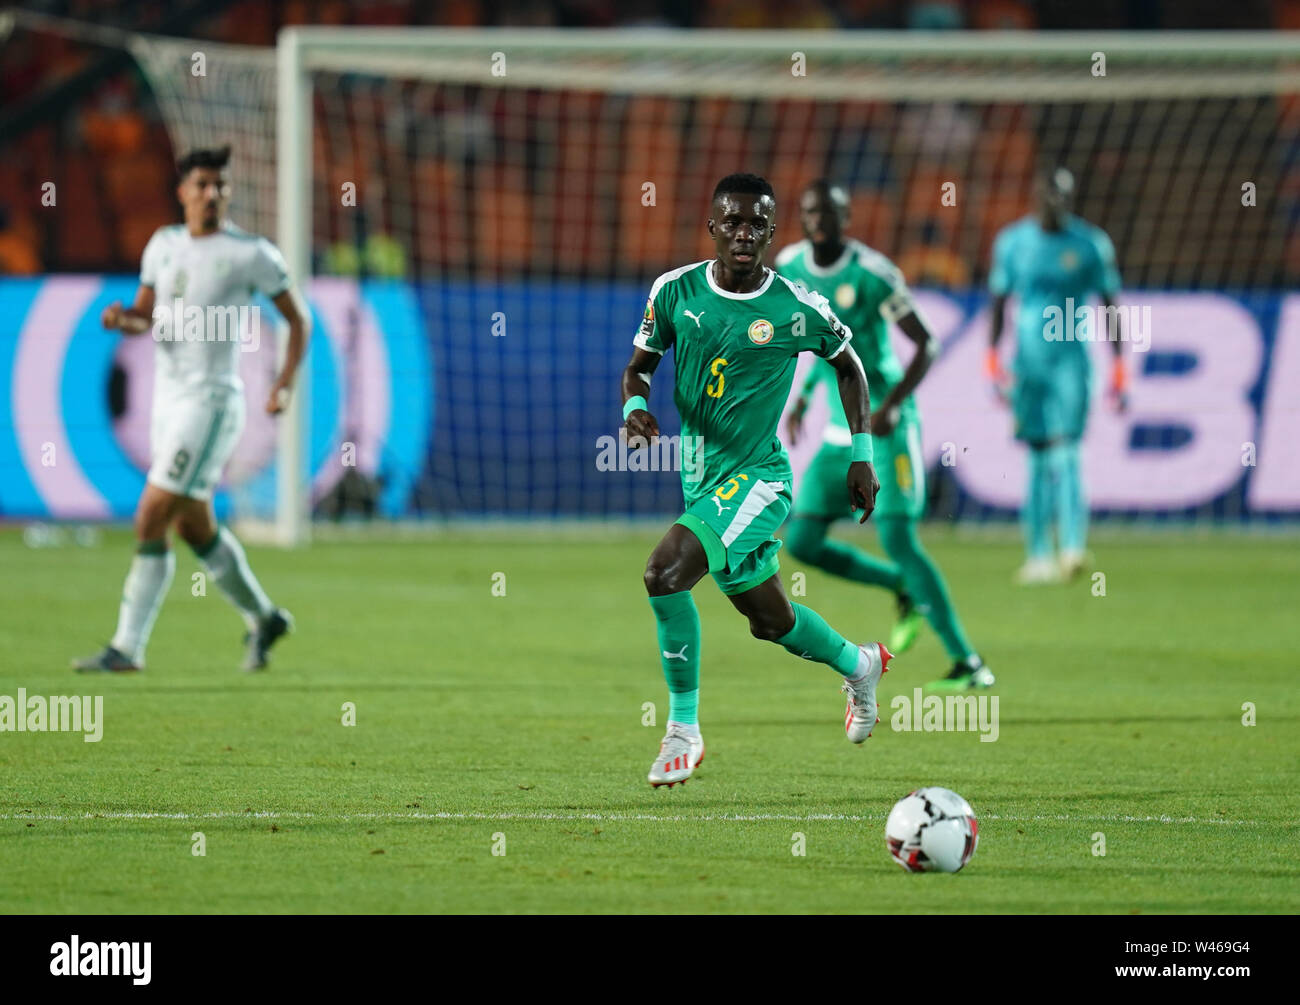 Cairo, Algeria, Egypt. 19th July, 2019. FRANCE OUT July 19, 2019: Idrissa Gana Gueye of Senegal during the Final of 2019 African Cup of Nations match between Algeria and Senegal at the Cairo International Stadium in Cairo, Egypt. Ulrik Pedersen/CSM/Alamy Live News Stock Photo